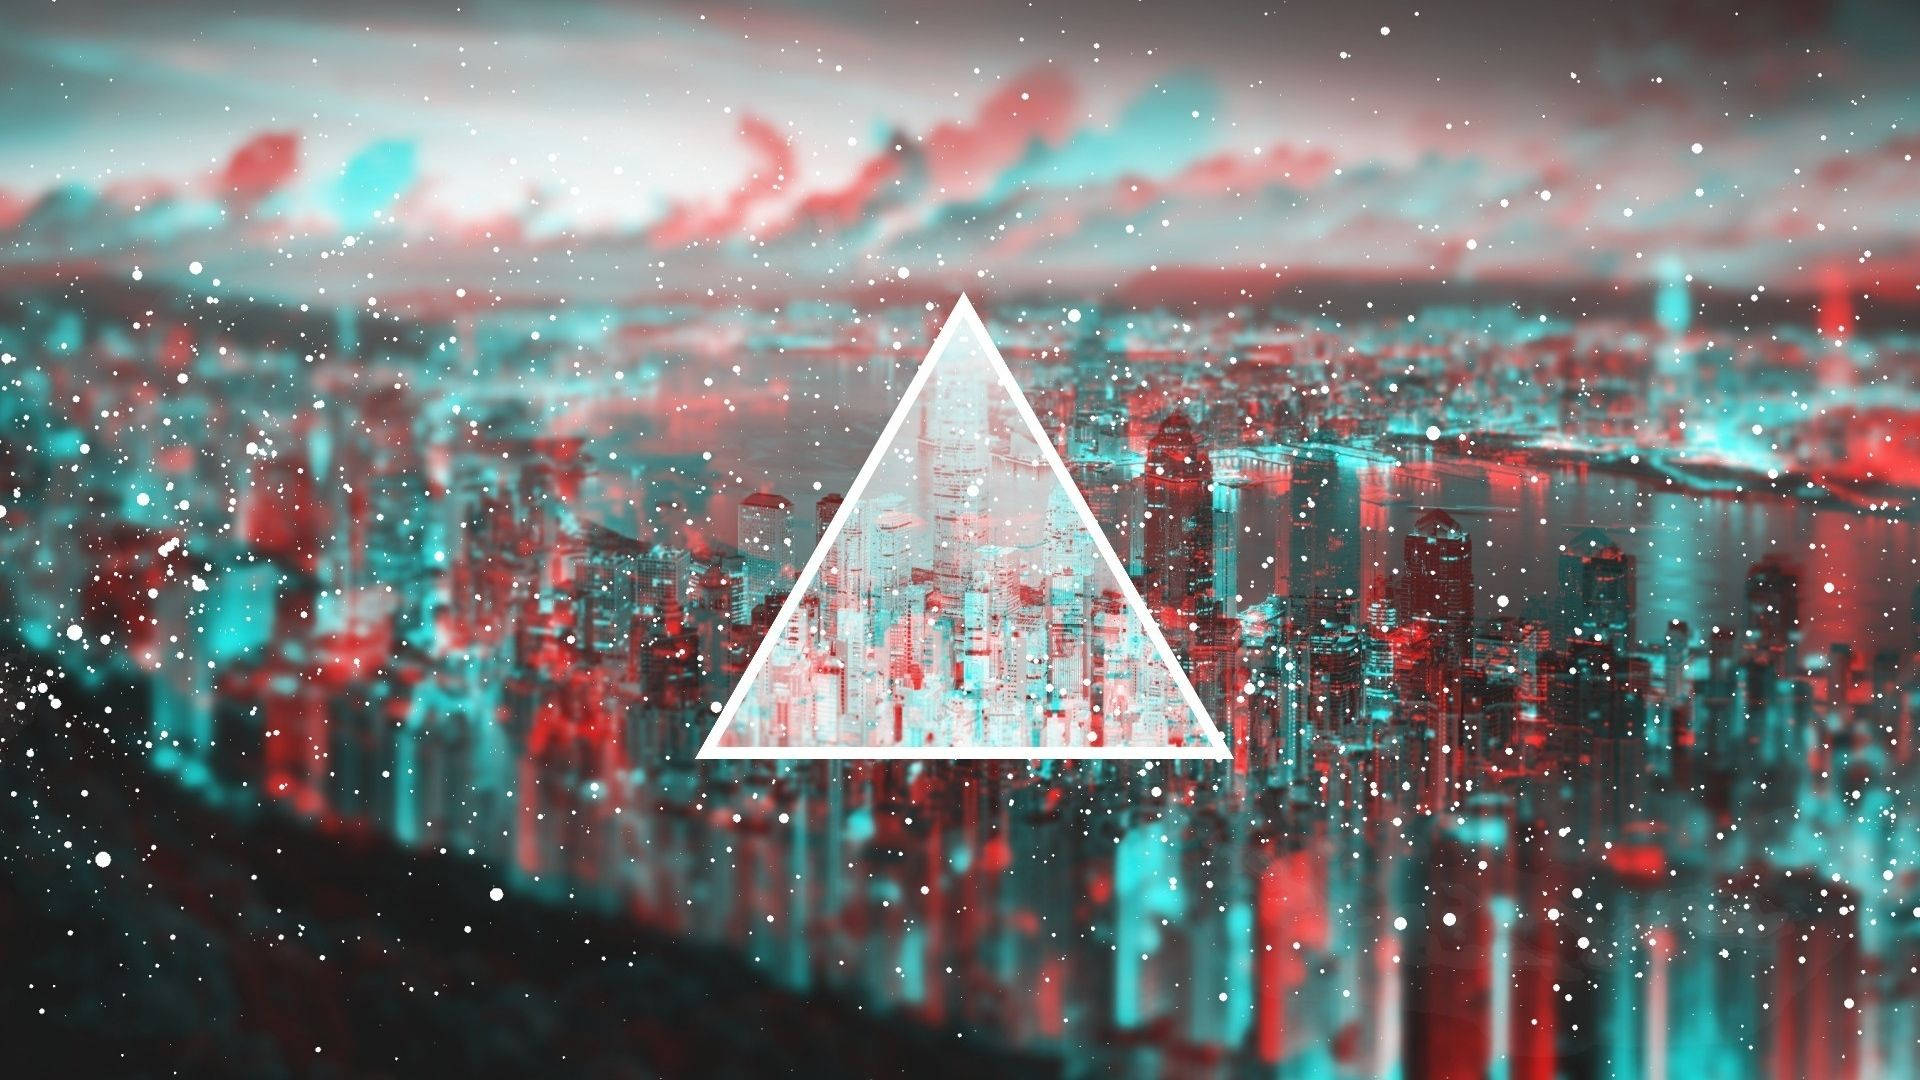 Abstract Artwork with HD Triangle and Glitch Elements Wallpaper